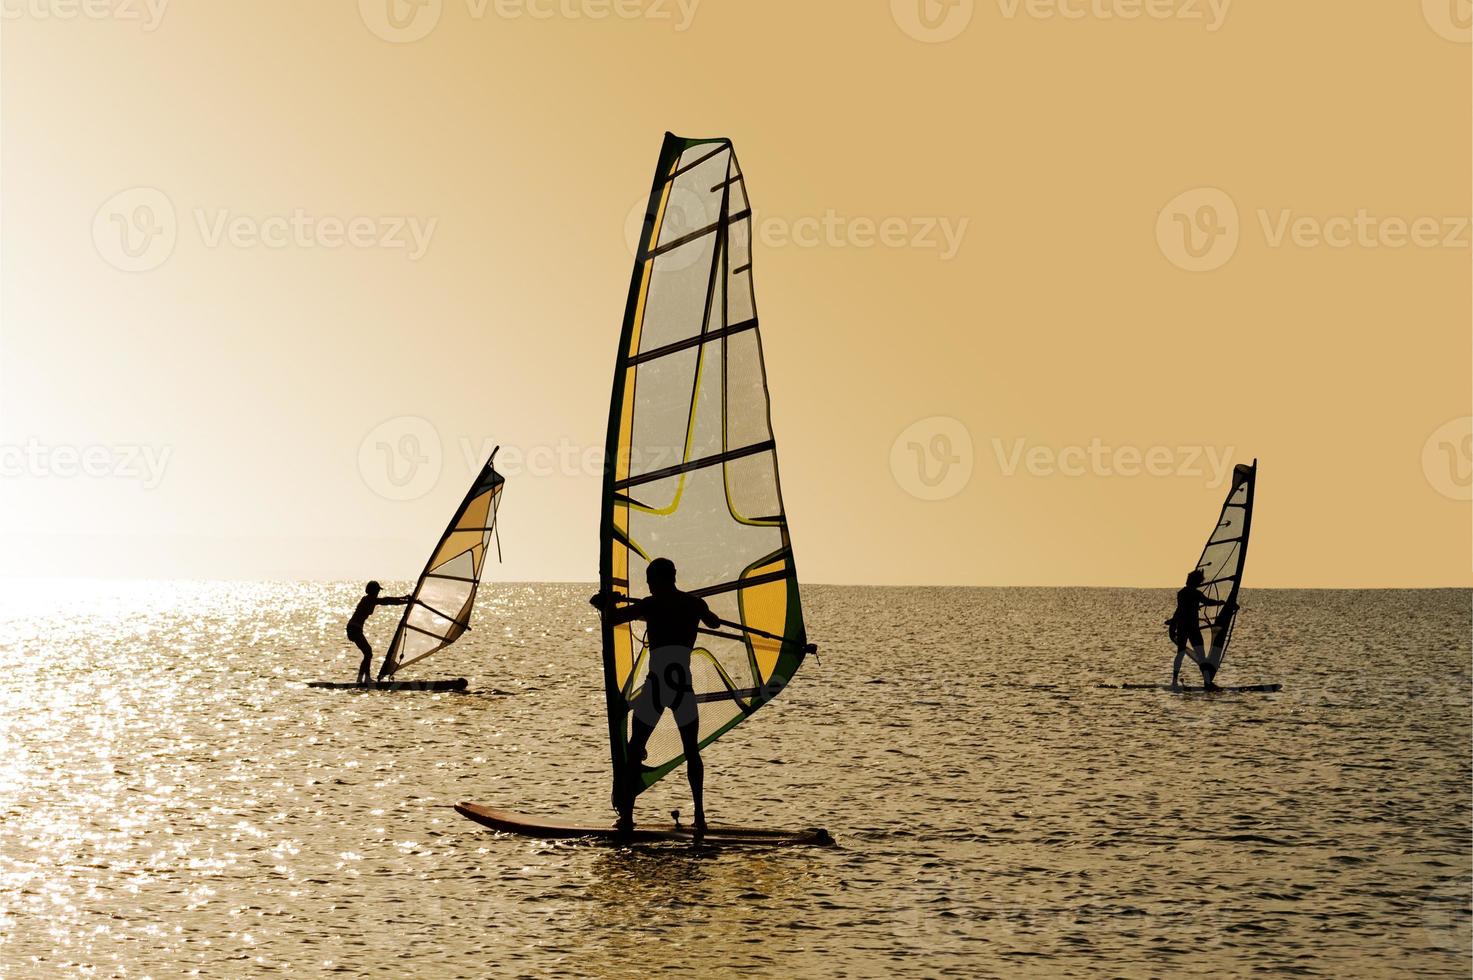 Silhouettes of three windsurfers on waves of a gulf photo